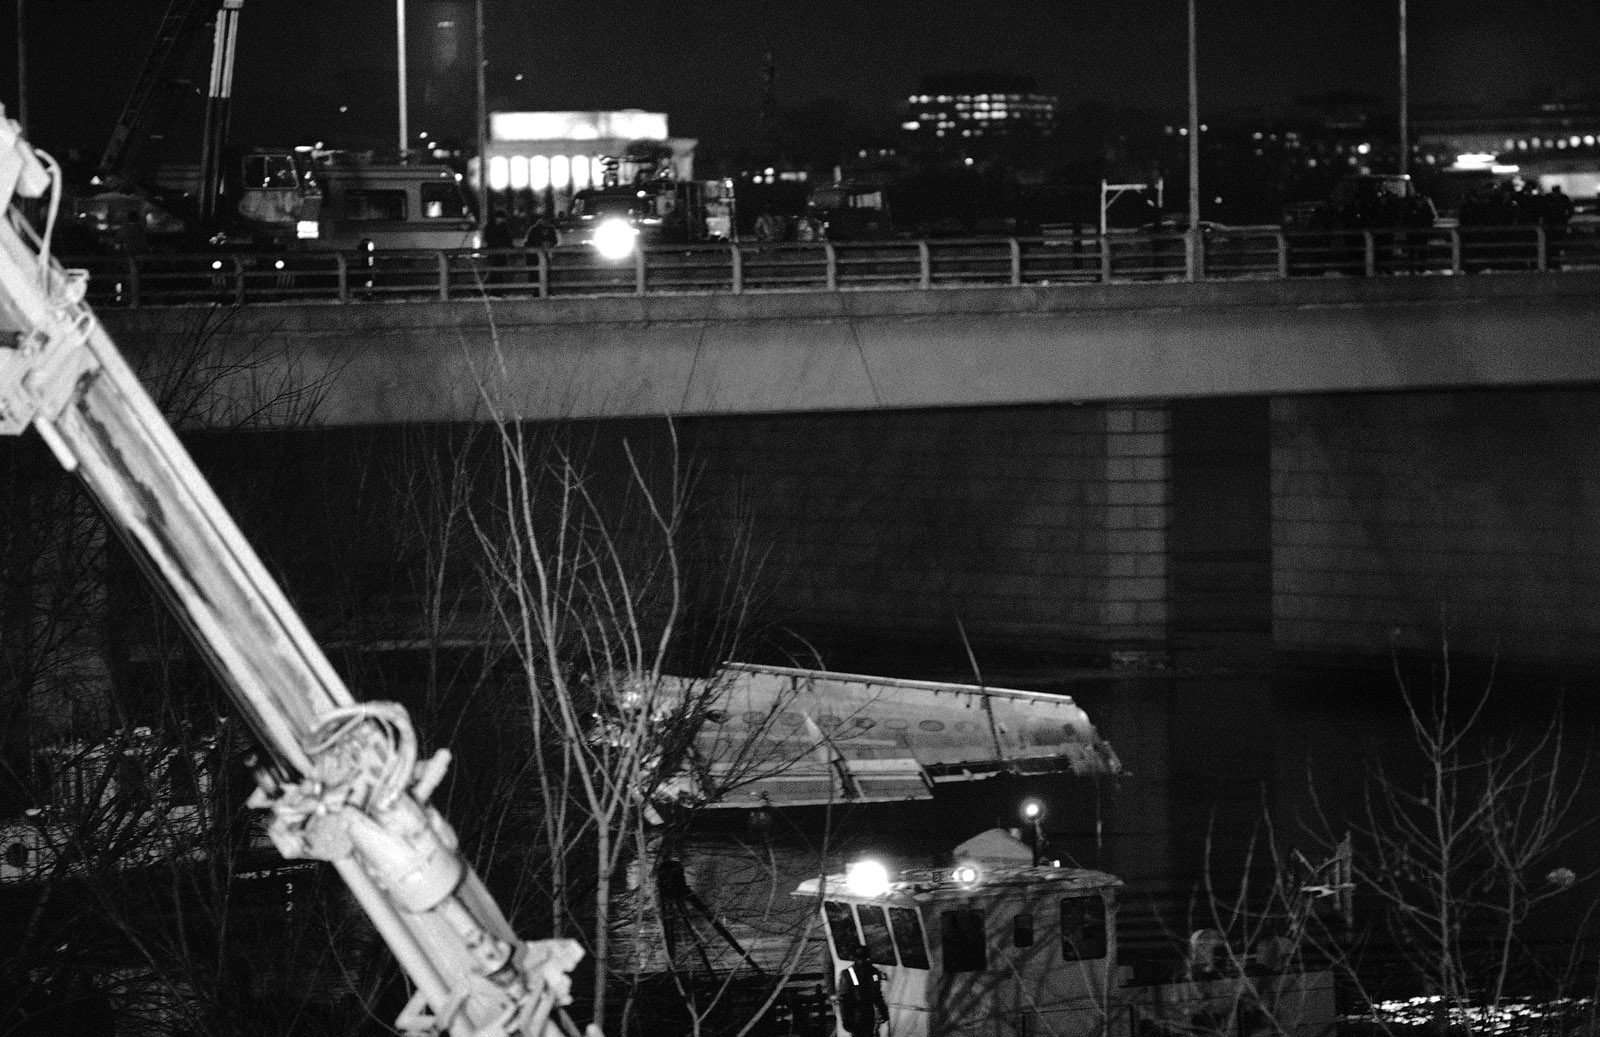 A section of a wing of the Air Florida jetliner which crashed into Washington’s Potomac River on Wednesday is raised from the water, Friday, Jan. 15, 1982. Salvage workers labored through the day Friday, trying to find victims of the crash, portions of the plane and the cockpit recorders which were aboard. (AP Photo)